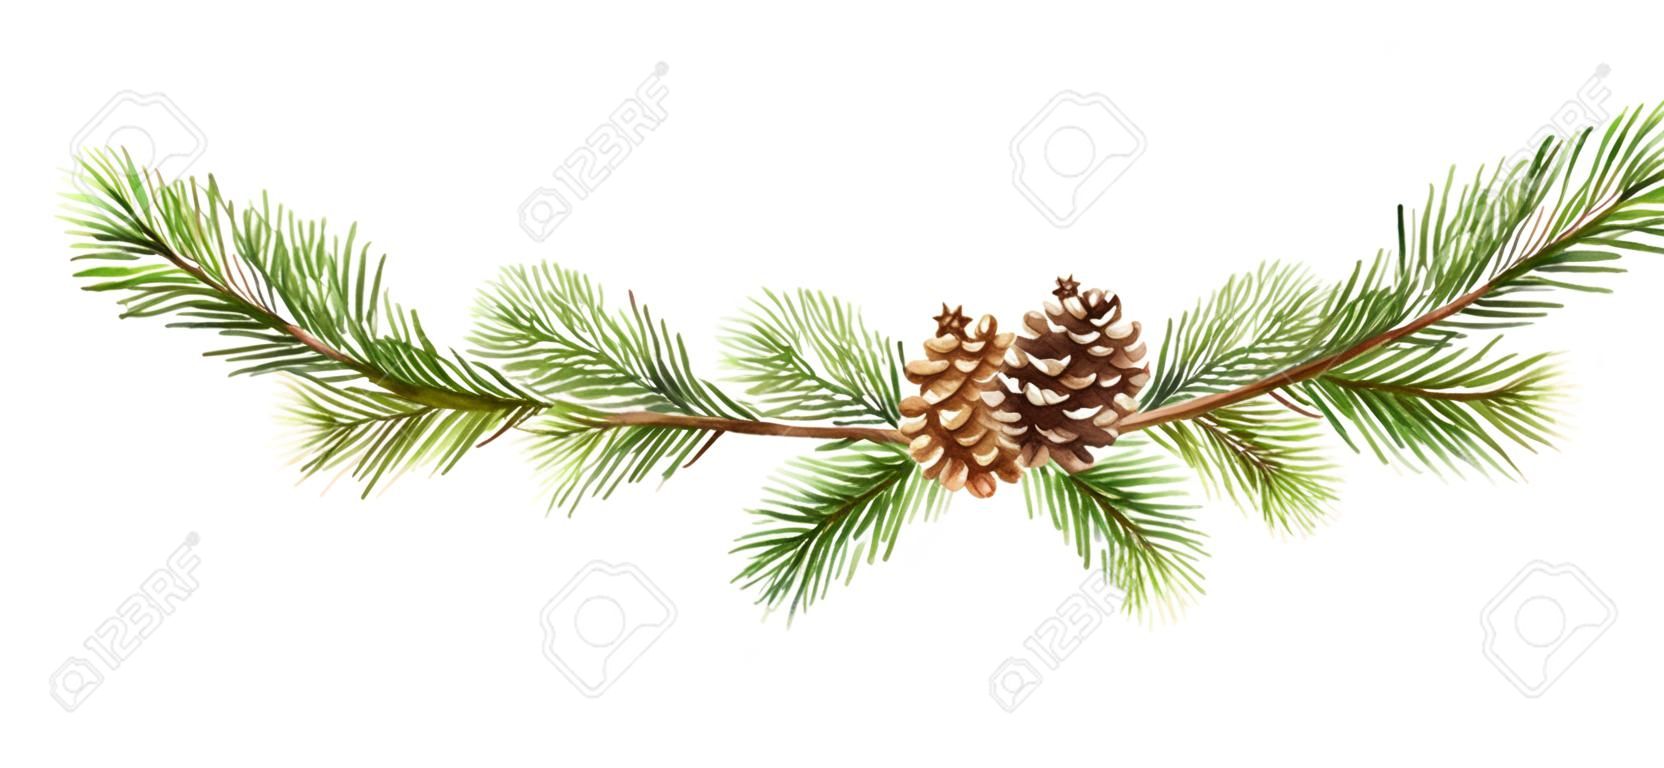 Watercolor vector Christmas banner with fir branches and place for text. Illustration for greeting cards and invitations isolated on white background.